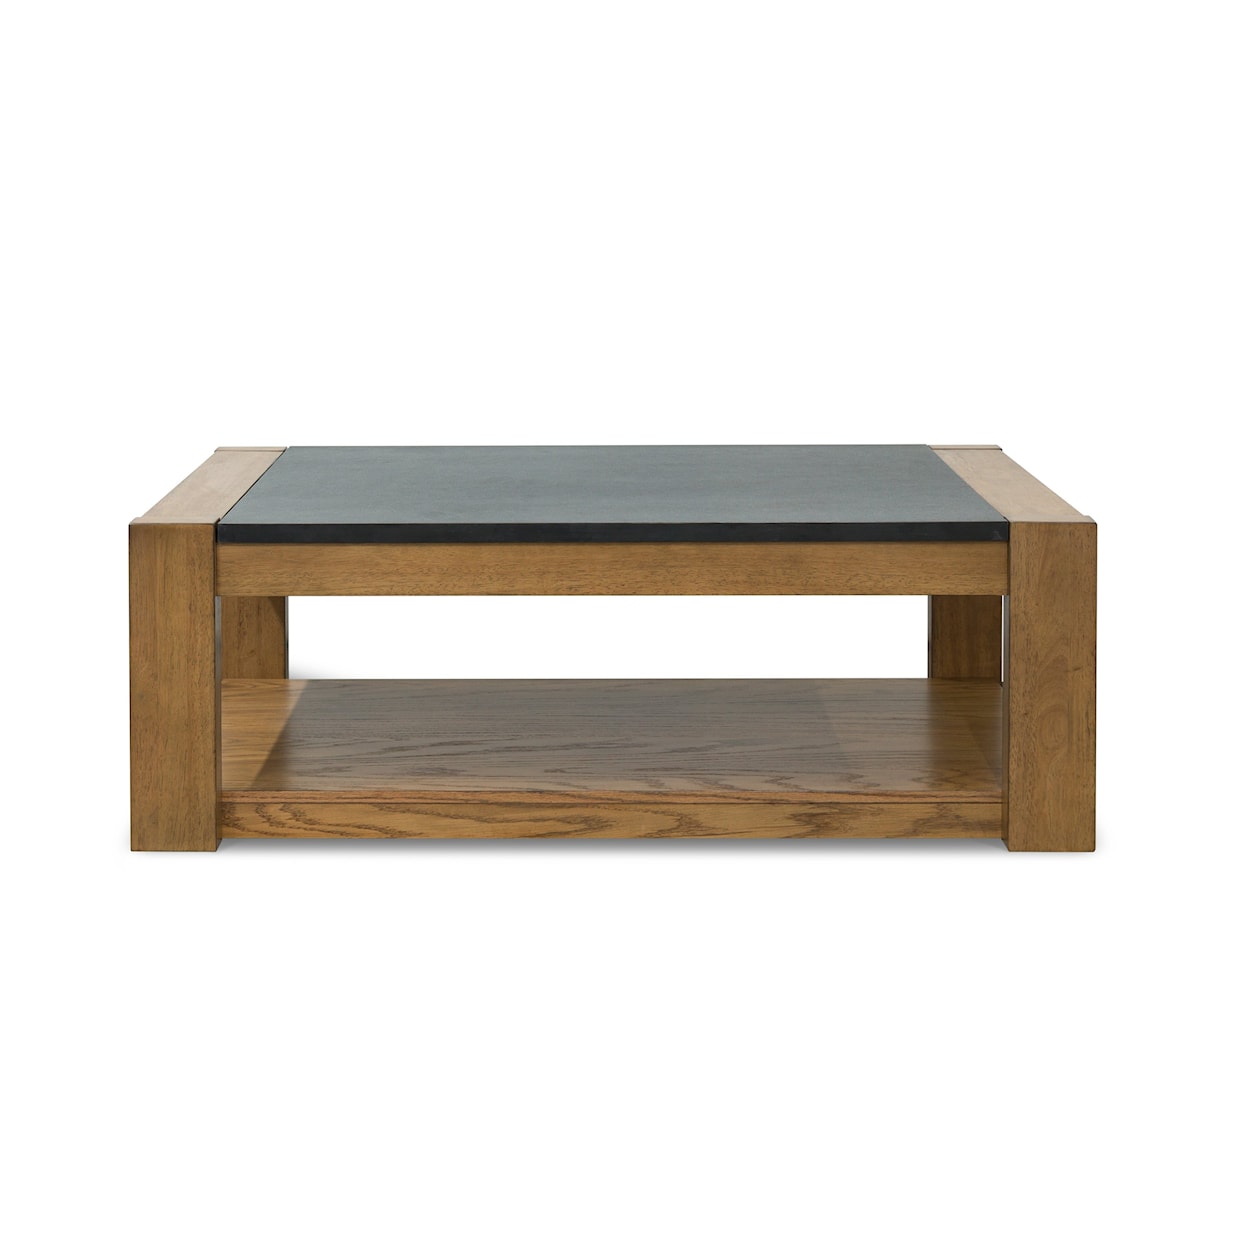 Signature Design by Ashley Quentina Lift Top Coffee Table